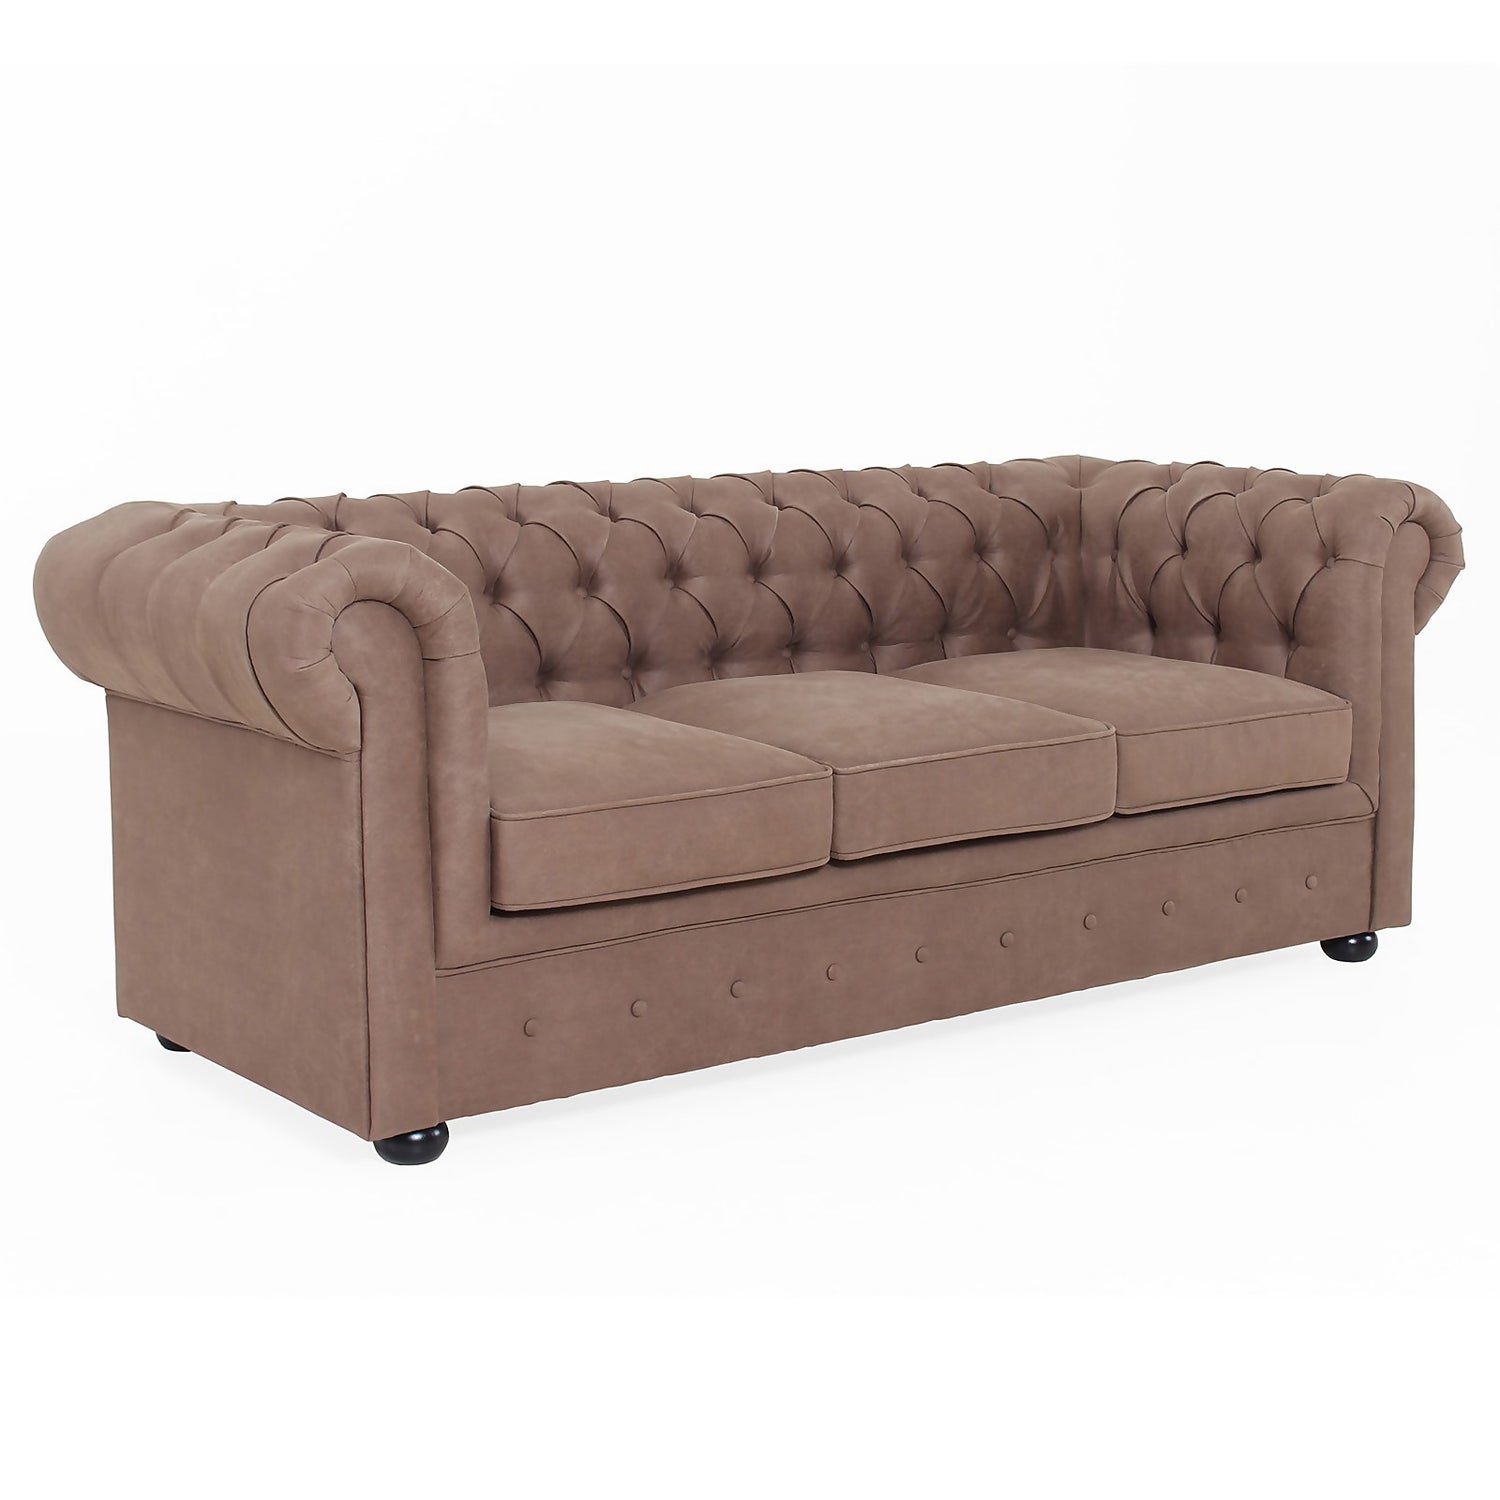 Chesterfield Faux Leather 3 Seater Sofa